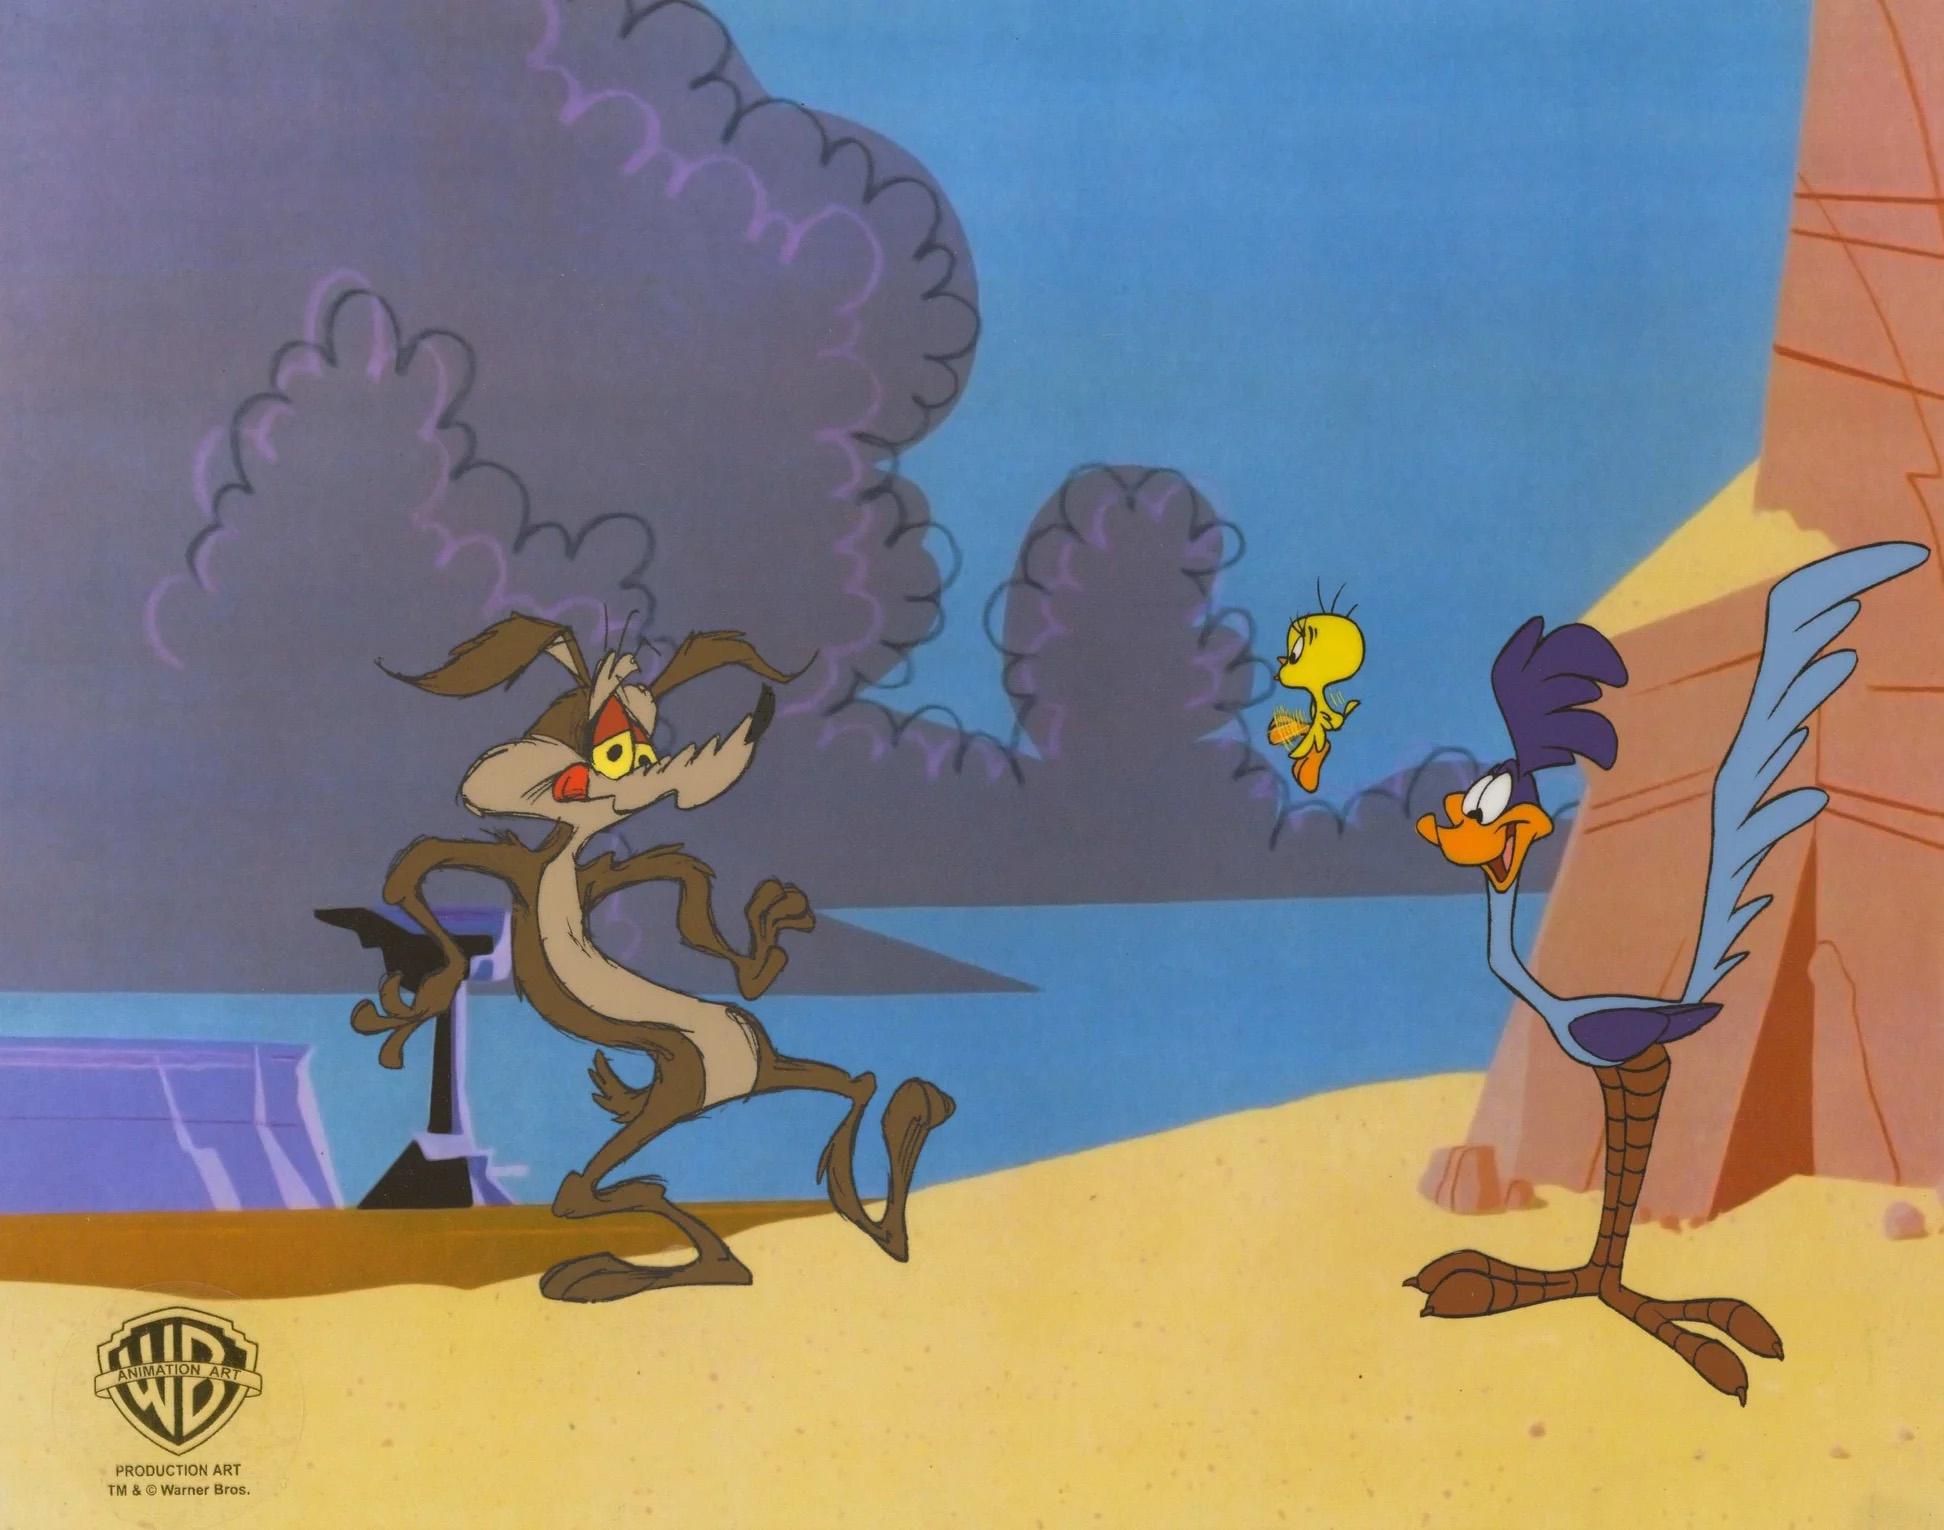 Looney Tunes Original Production Cel: Wile E. Coyote, Roadrunner, and Tweety - Art by Chuck Jones